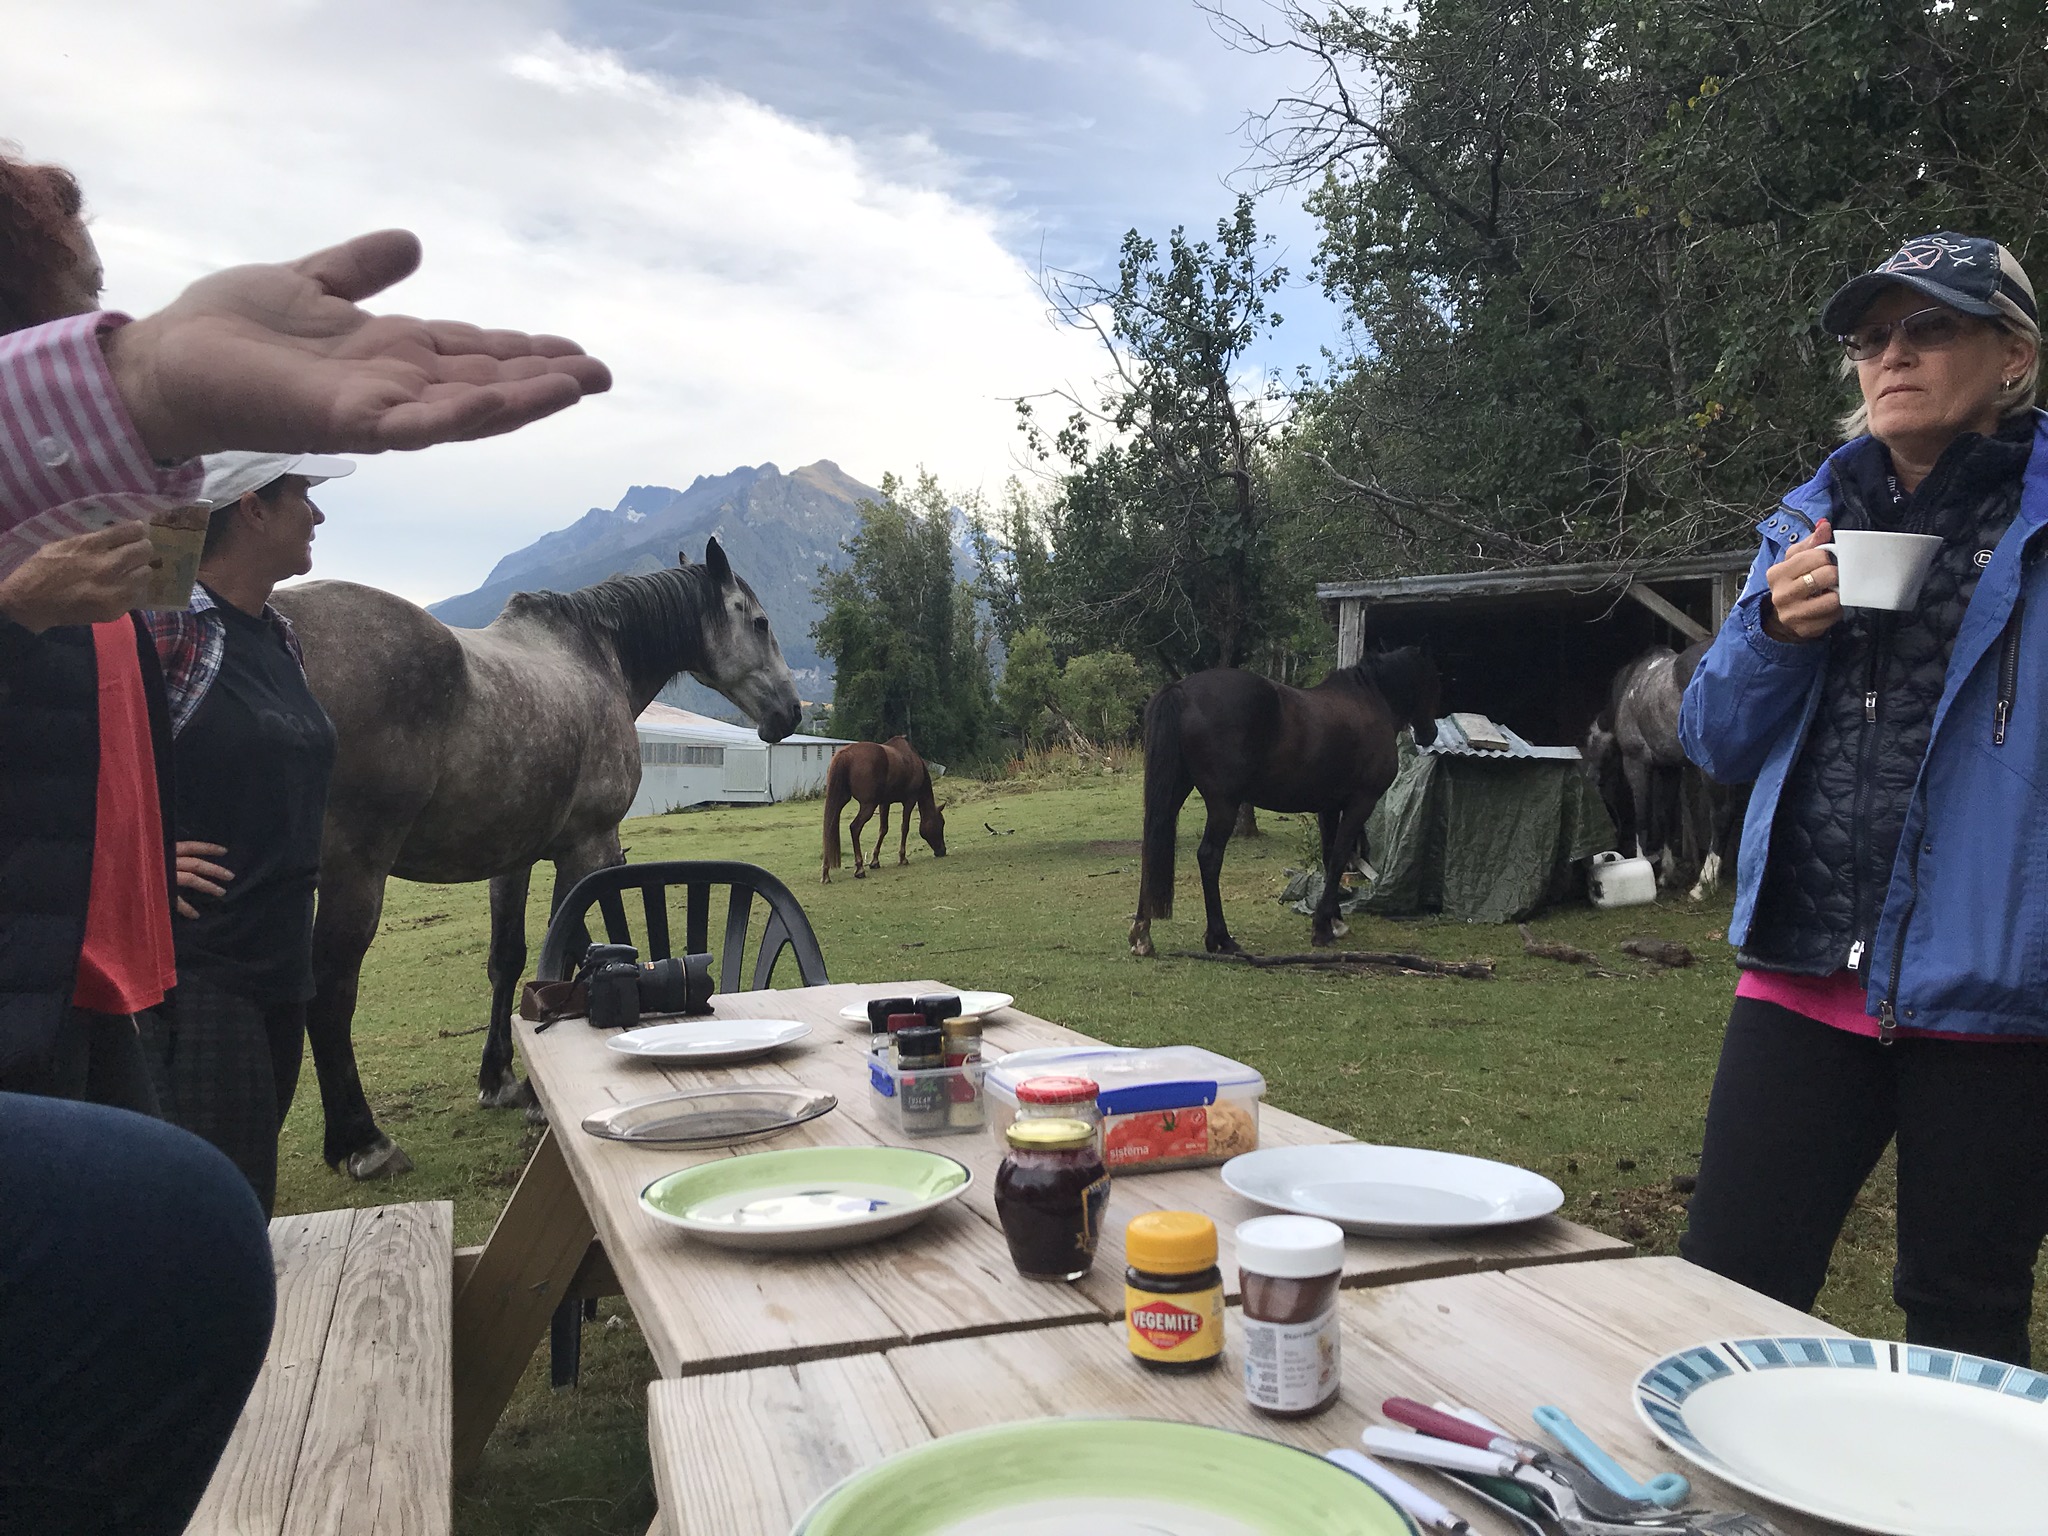 We ate outside and were frequently joined by curious horses. Everyone had a bit of vegimite on toast every morning. It wasn’t a favorite of mine never having eaten it before. It is filled with valuable B vitamins so I endured. 